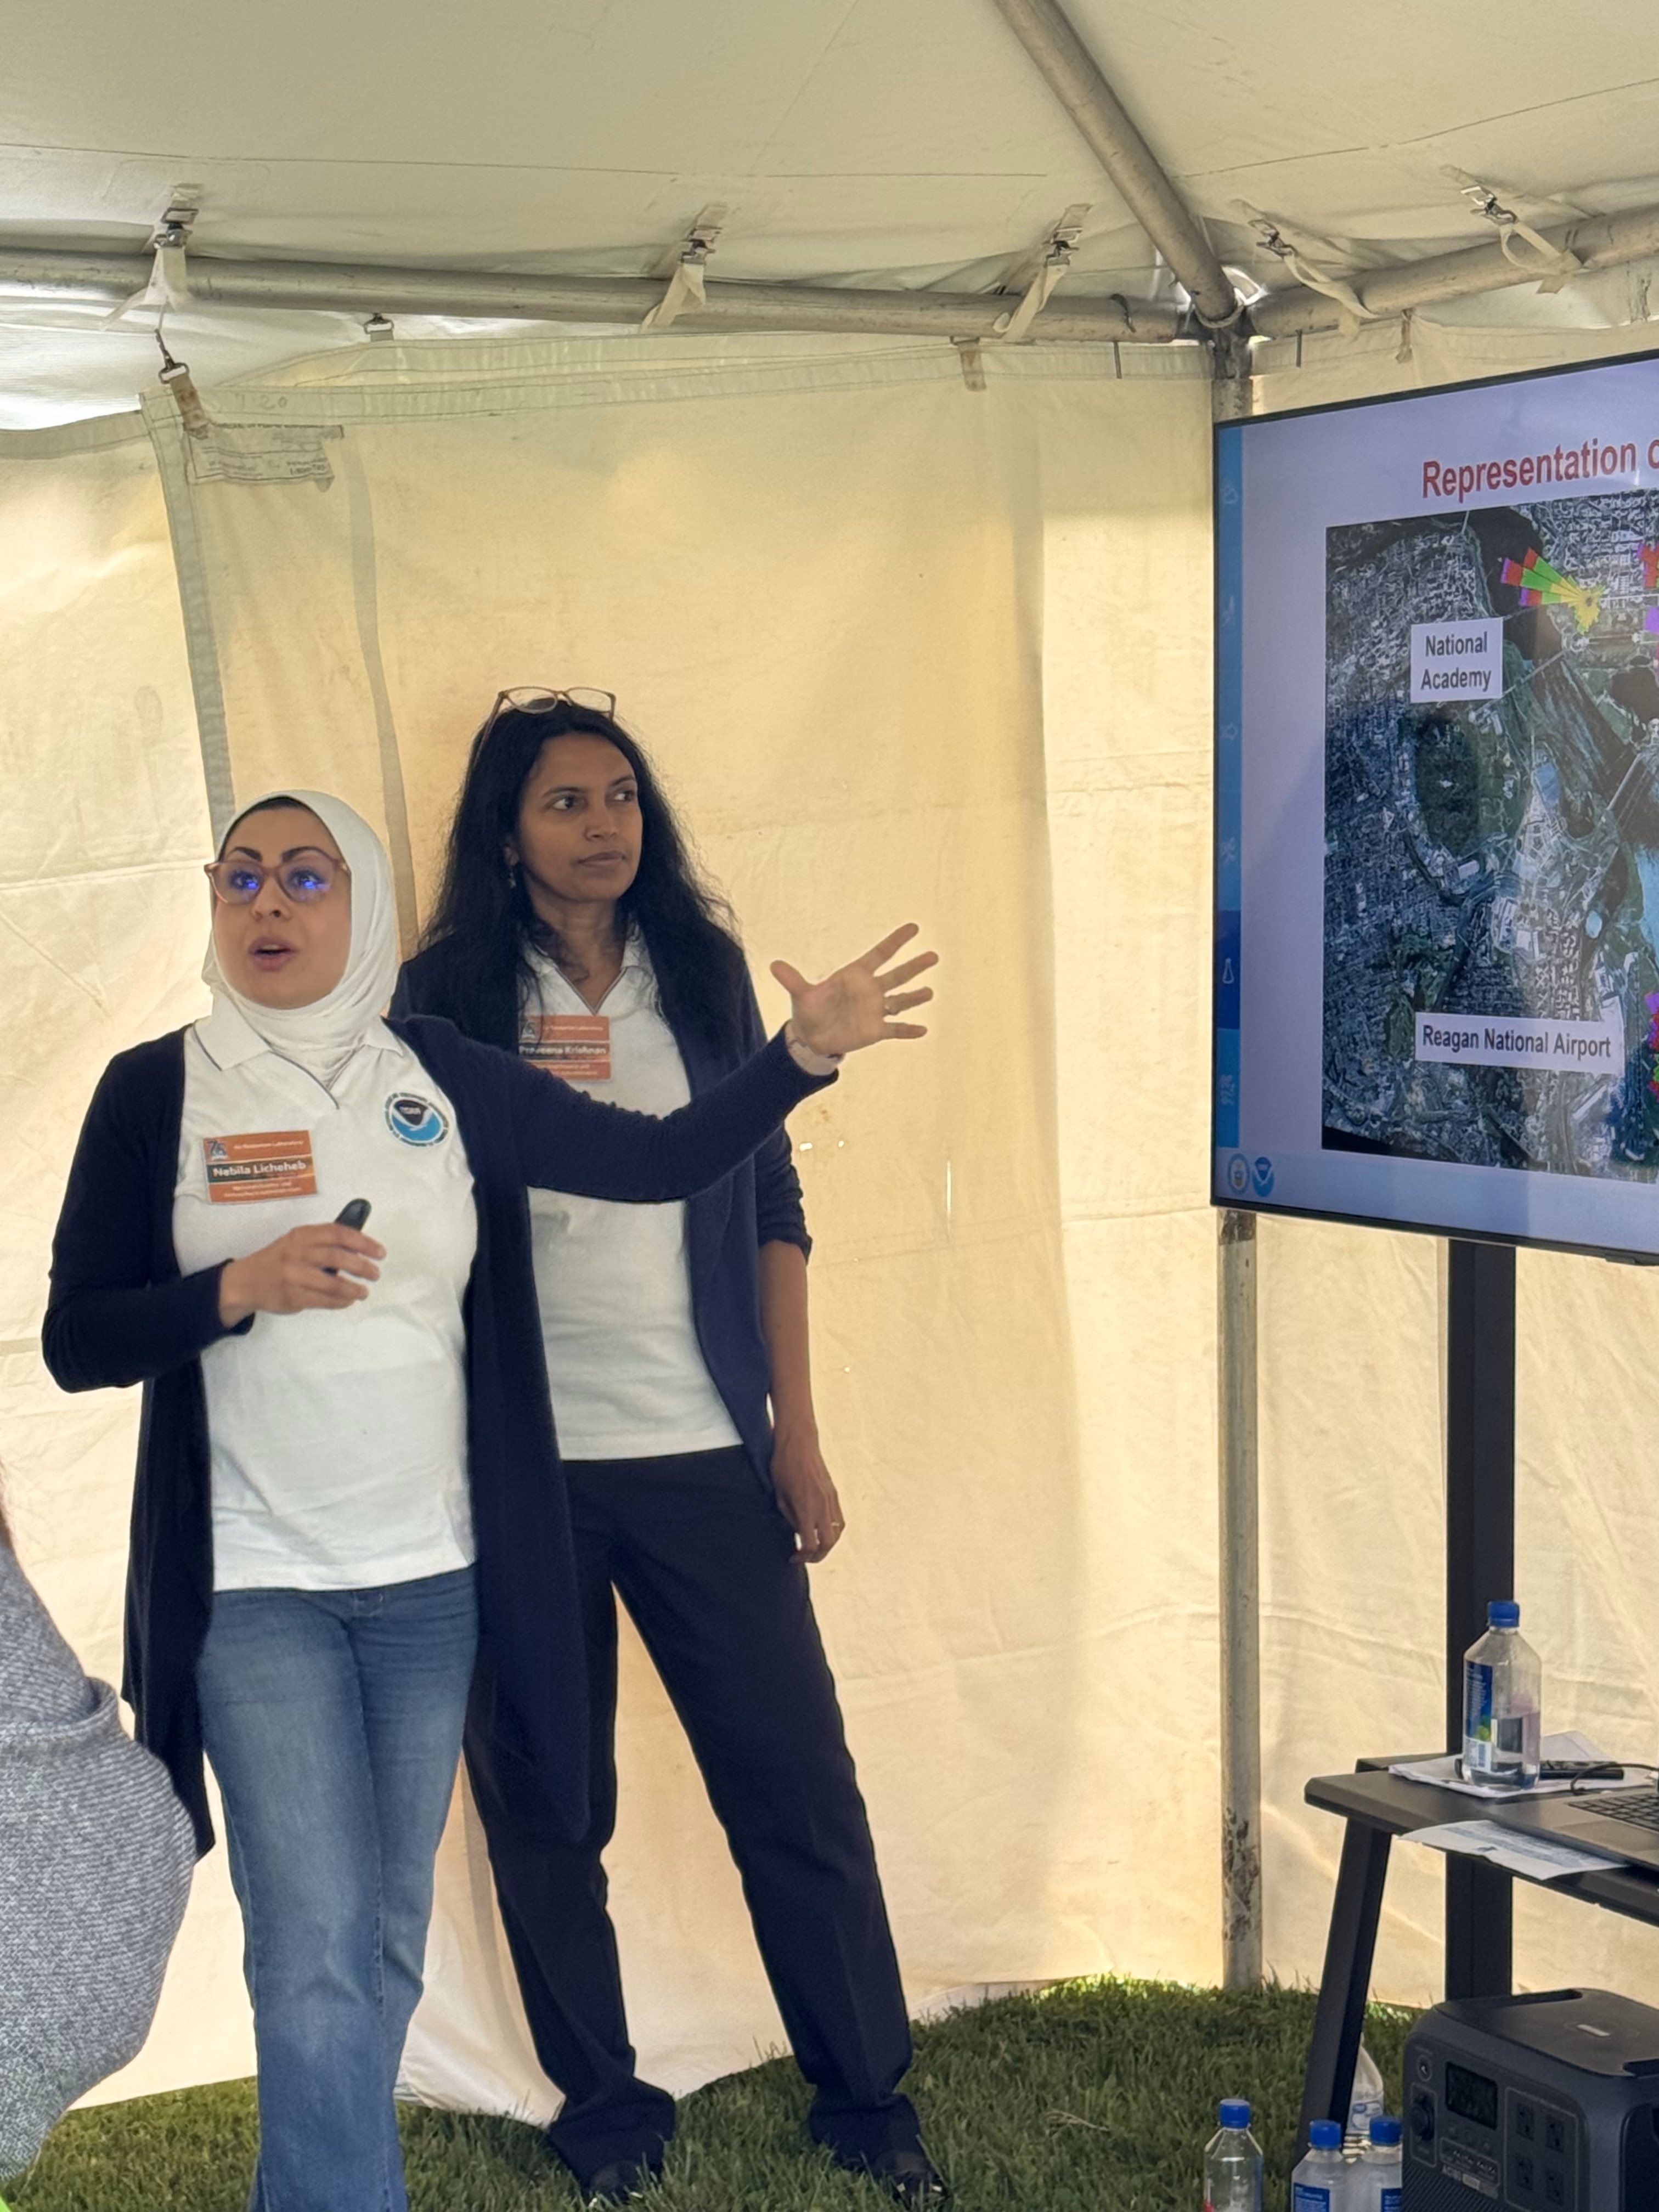 Two women standing inside a tent, presenting material that appears on a screen beside them